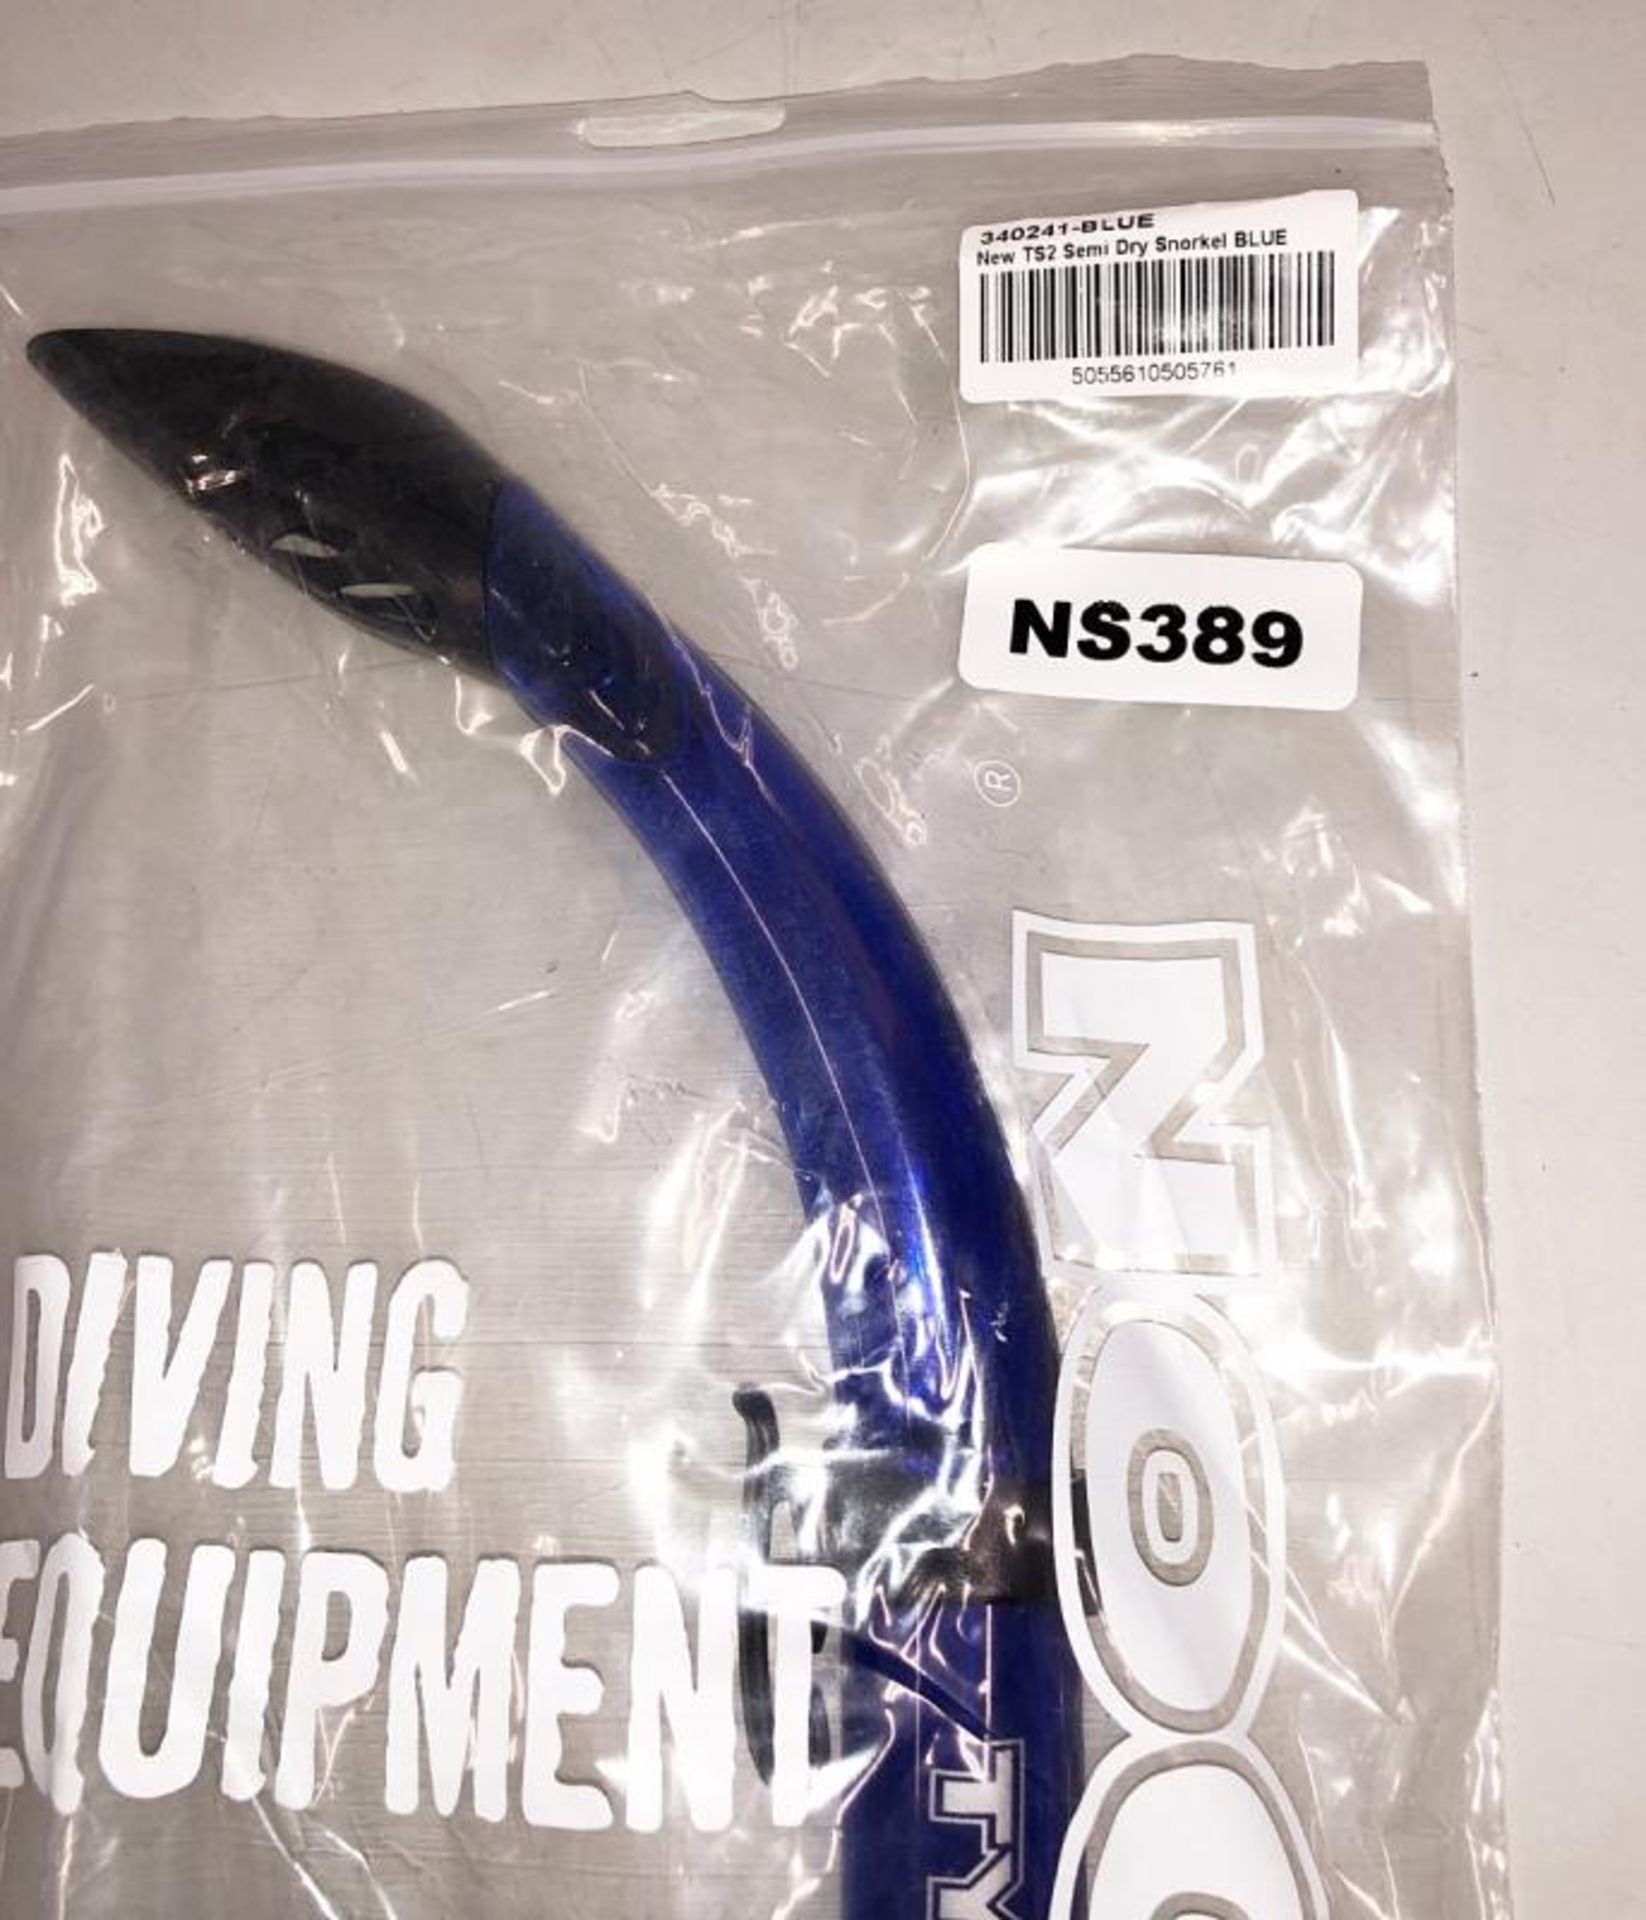 1 x New Semi Dry Typhoon Snorkel In Blue - Ref: NS389 - CL349 - Location: Altrincham WA14 - Used In - Image 3 of 4